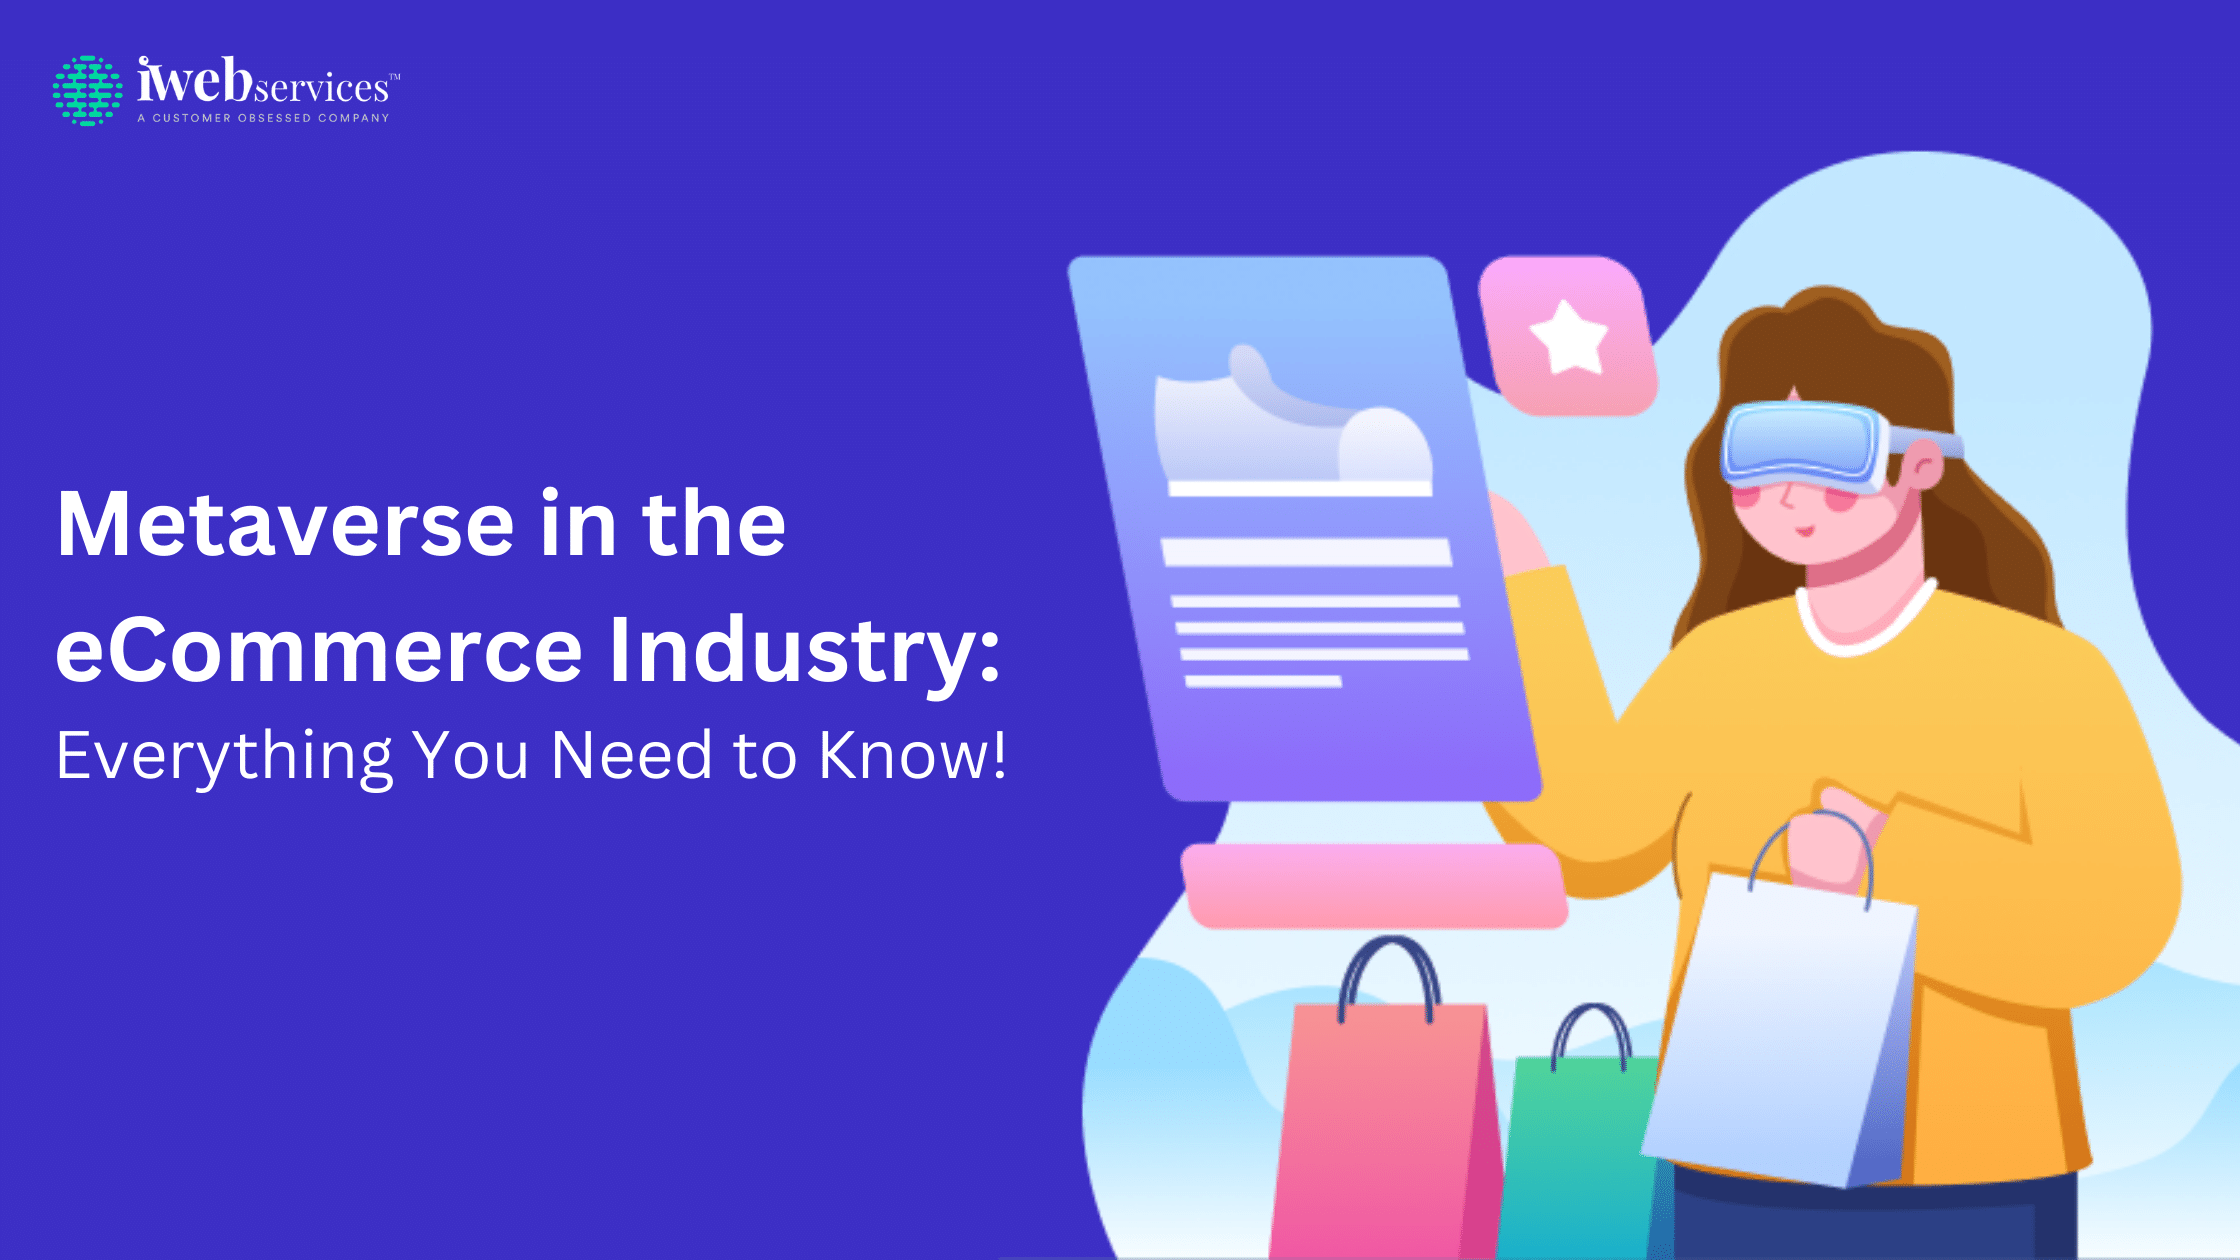 Metaverse in the eCommerce Industry: Everything You Need to Know